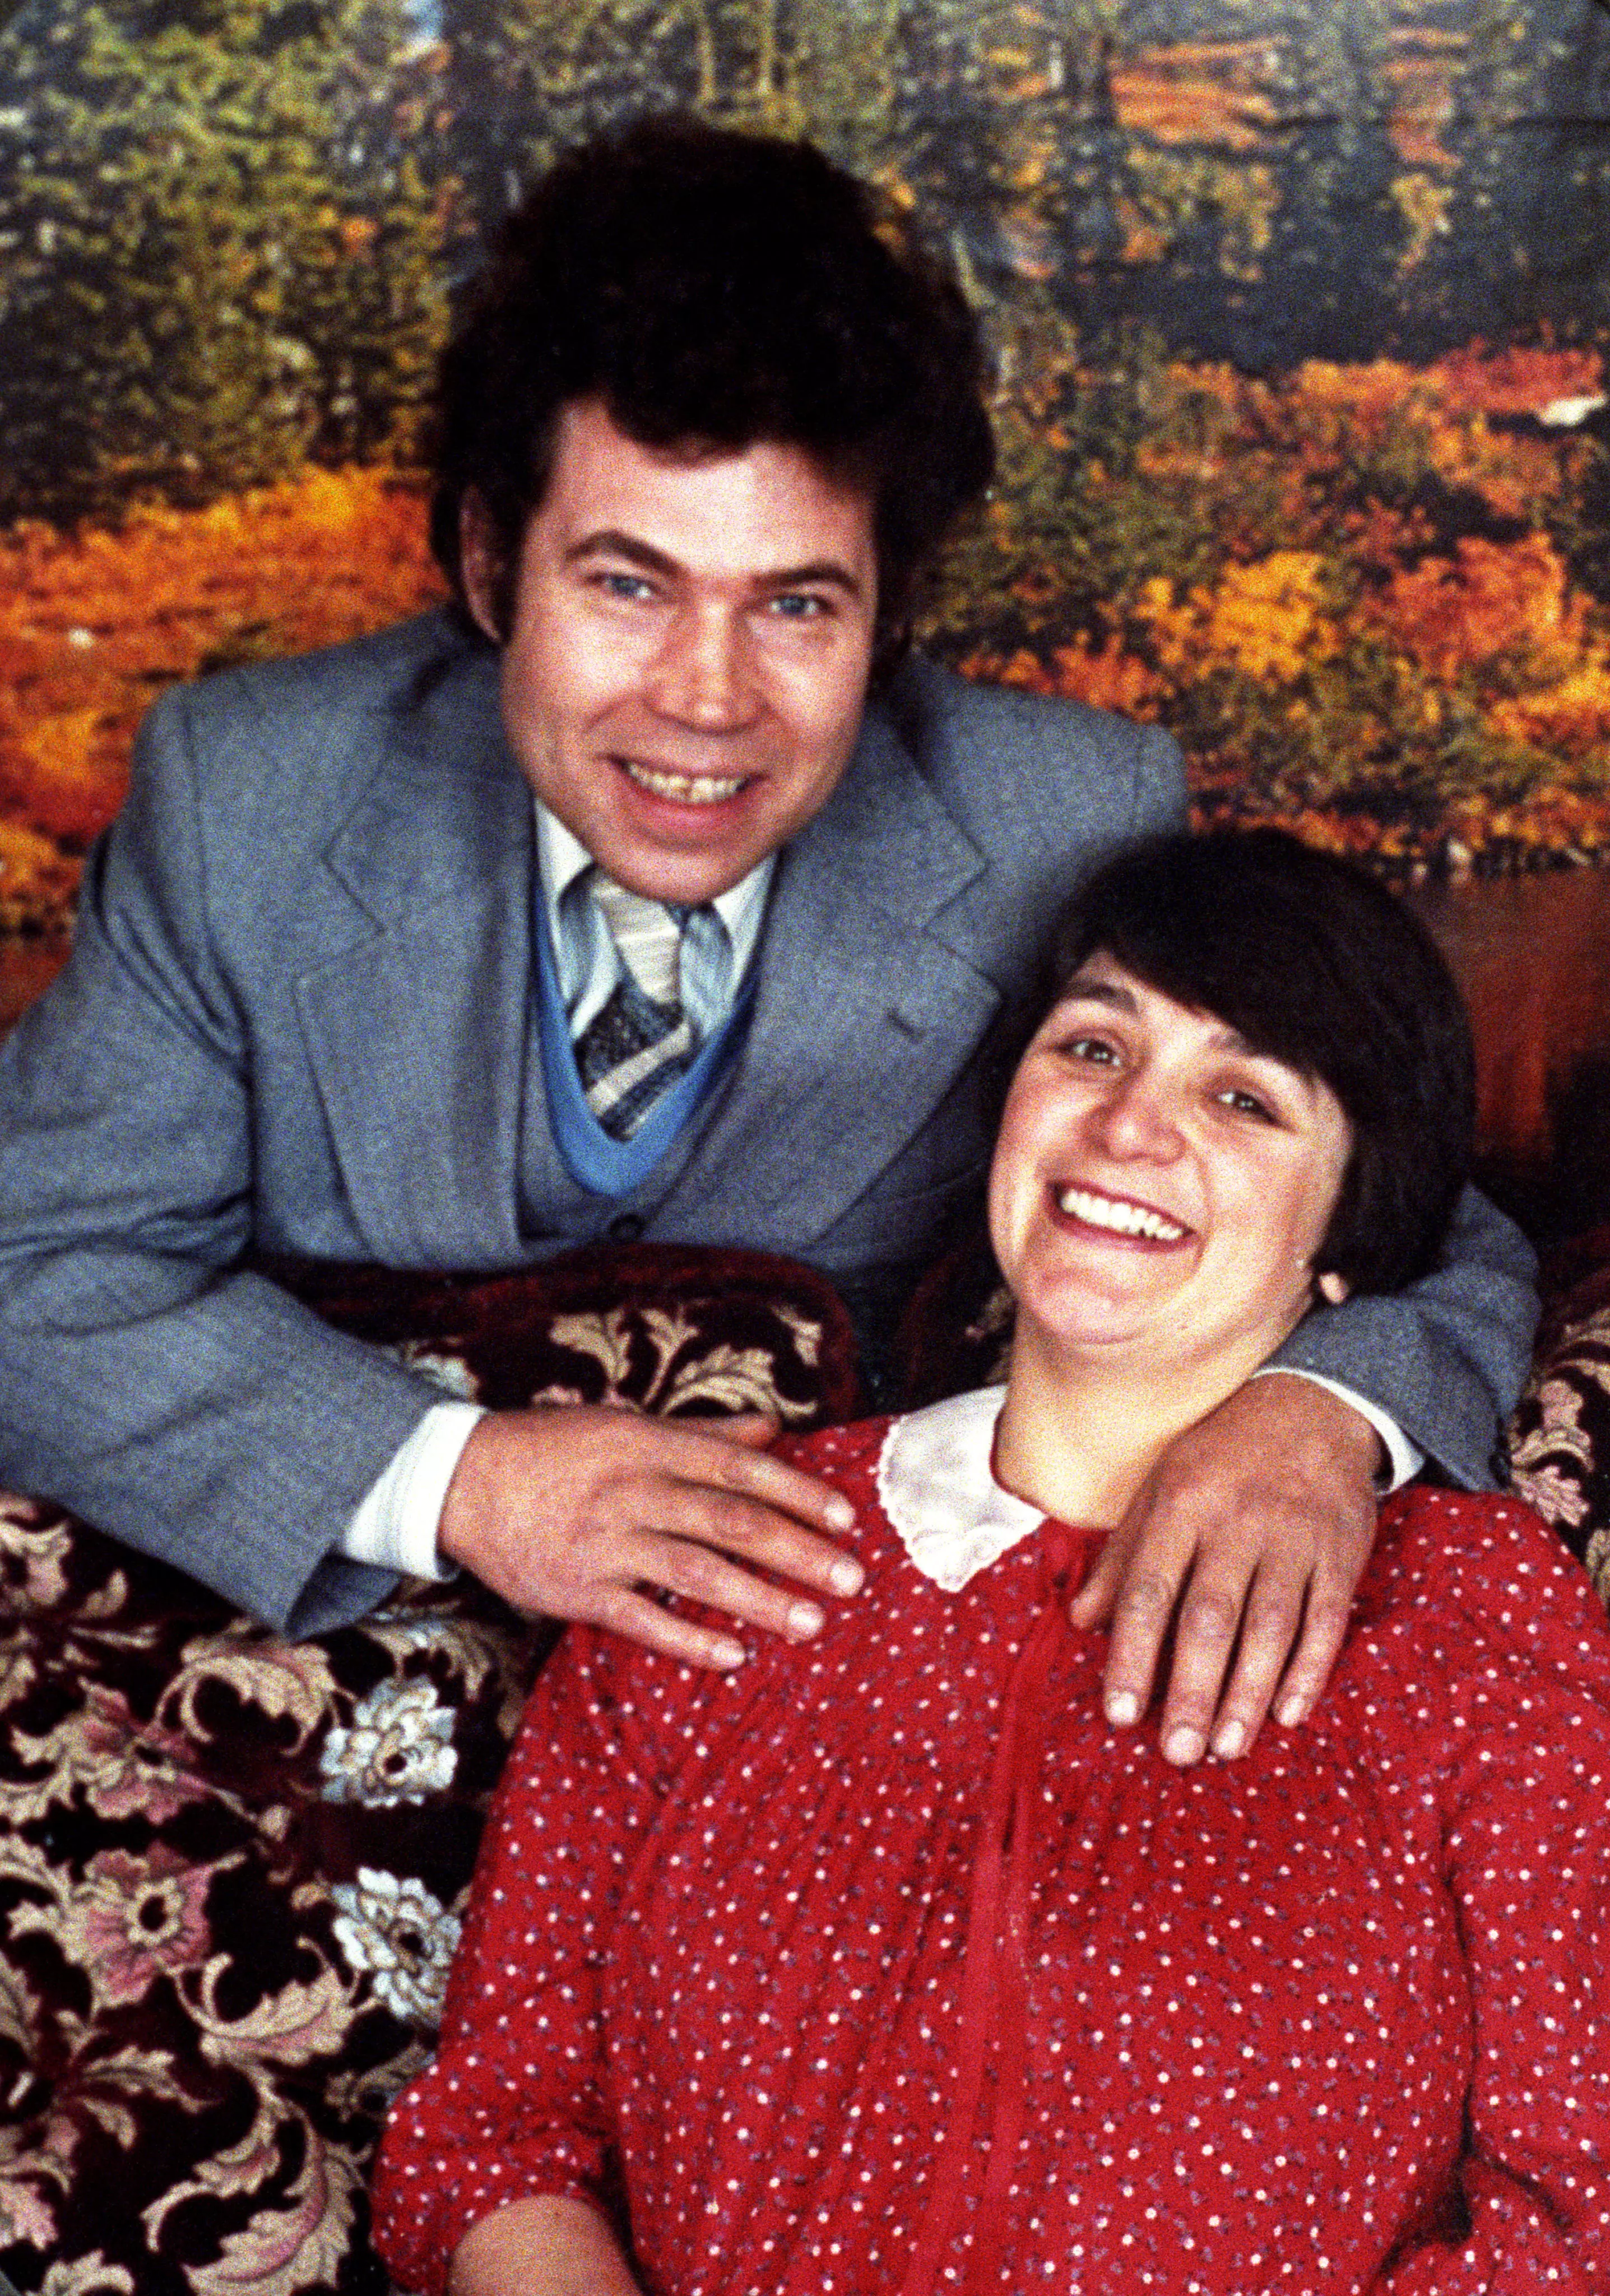 West was found guilty of 10 similar murders with her husband Fred West (